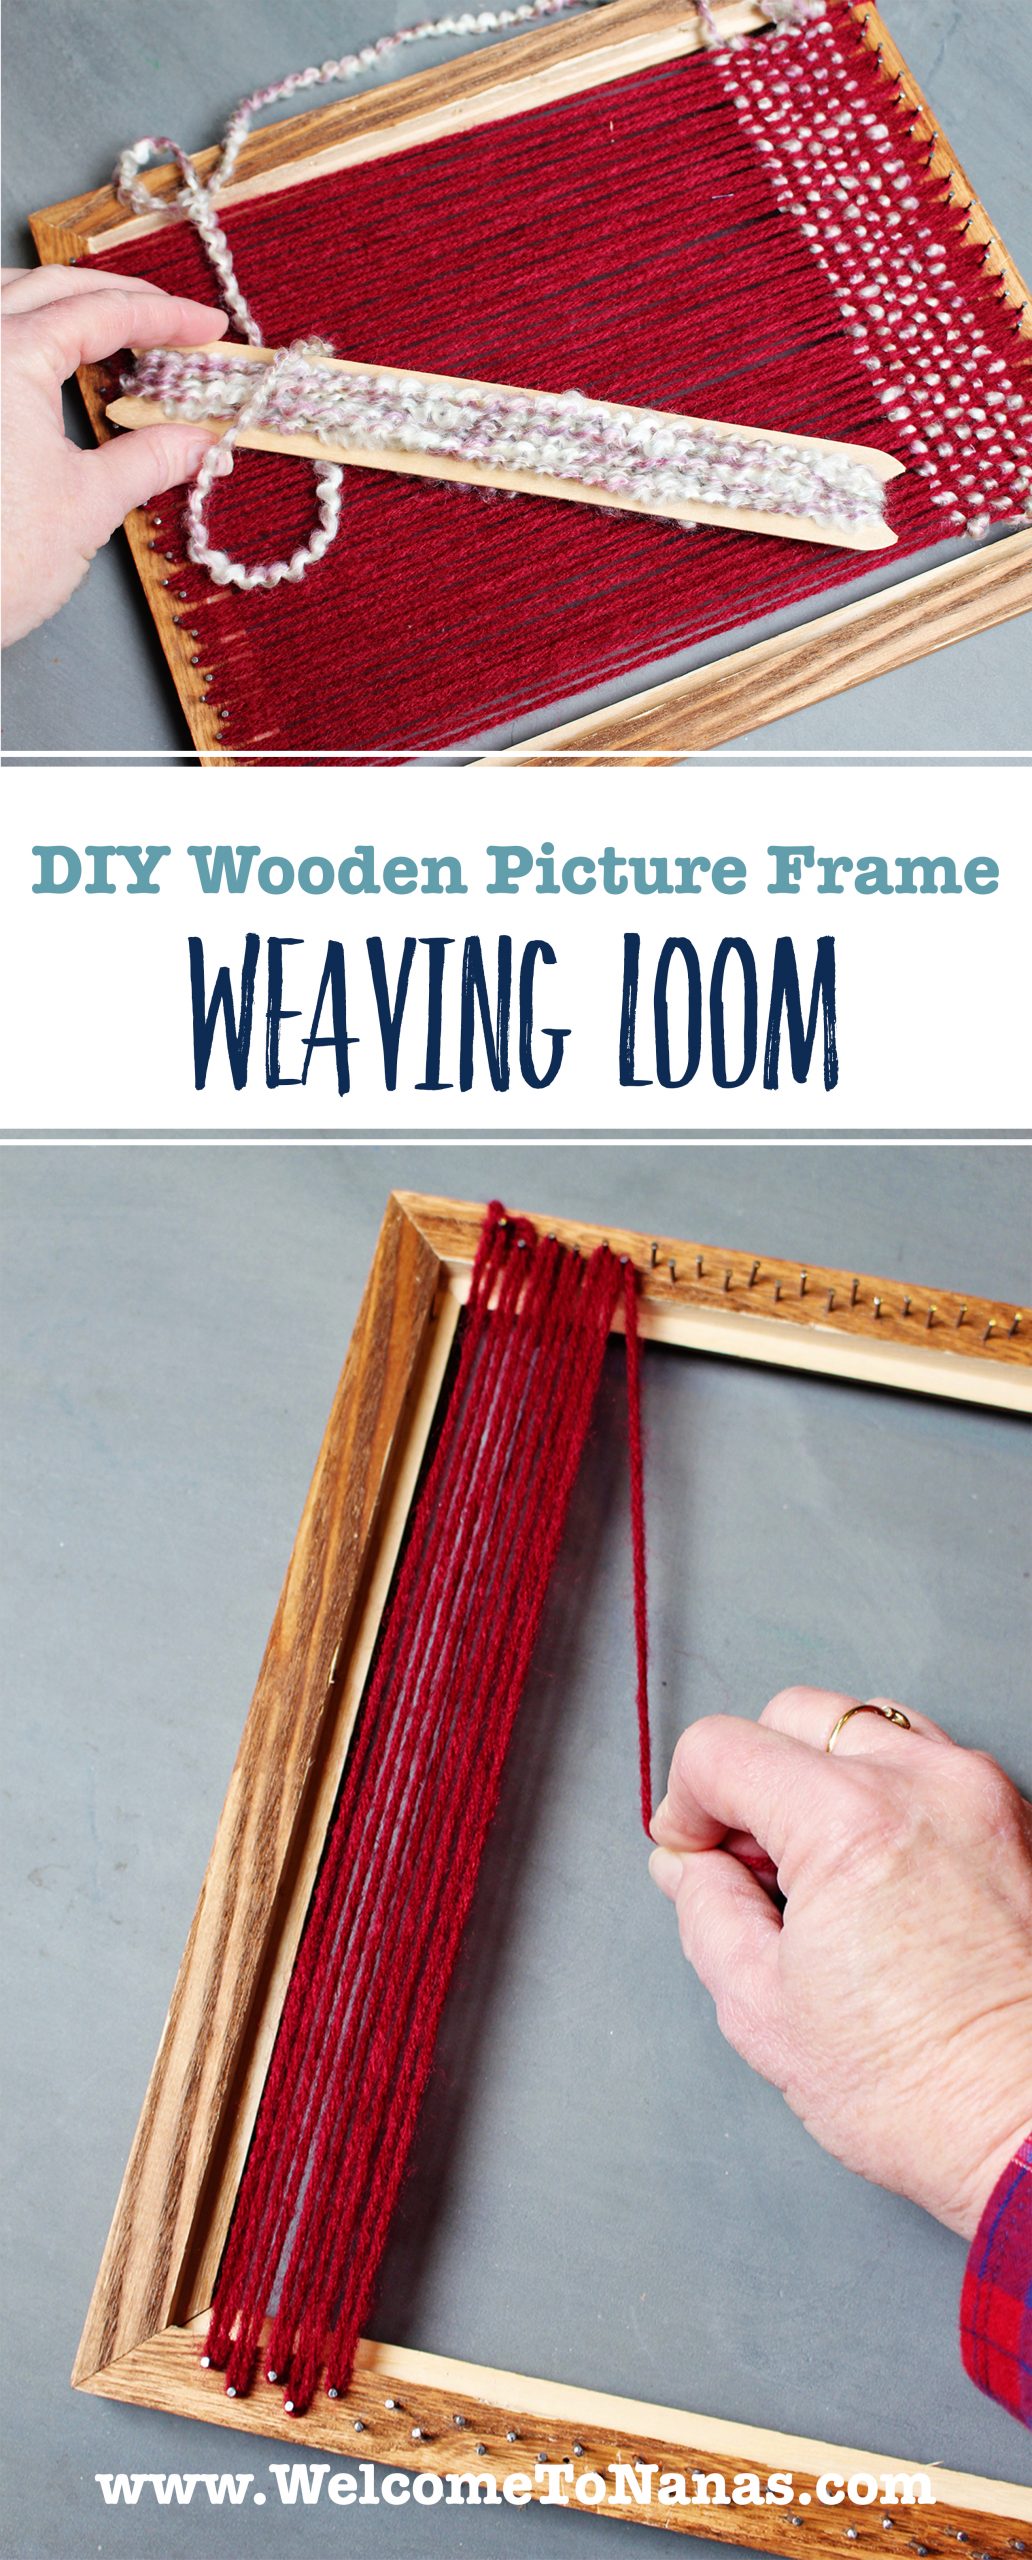 A wooden picture frame loom with warp yarn and a heddle.